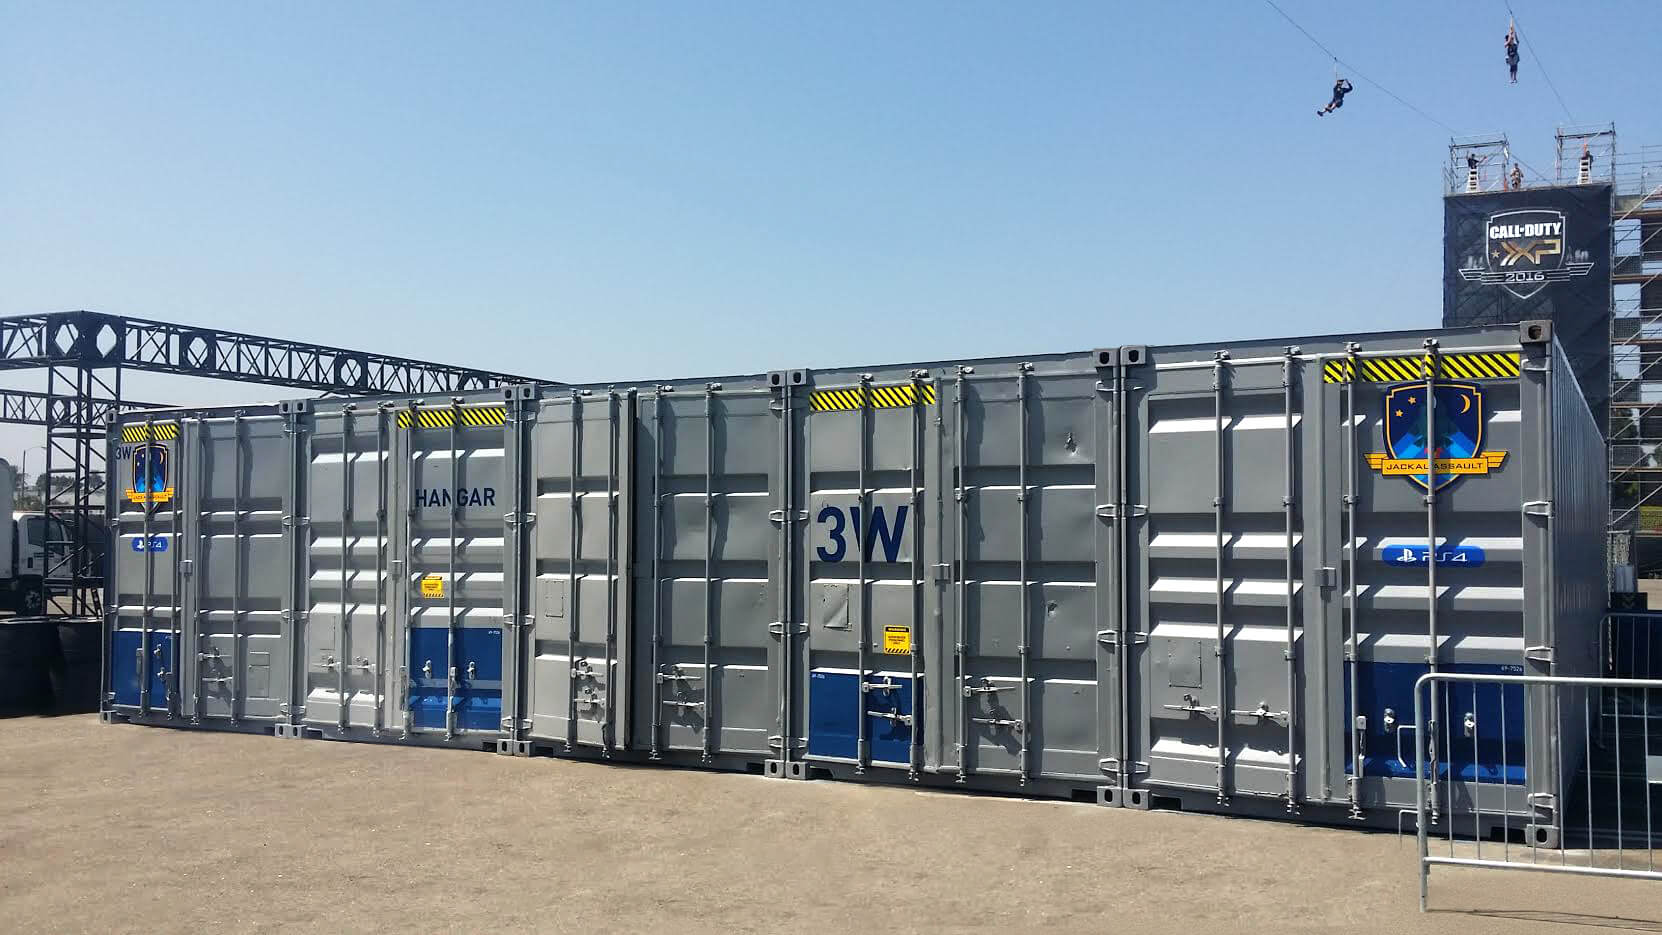 A vinyl graphic install on containers that housed 3D pilot simulators at the CALL OF DUTY XP